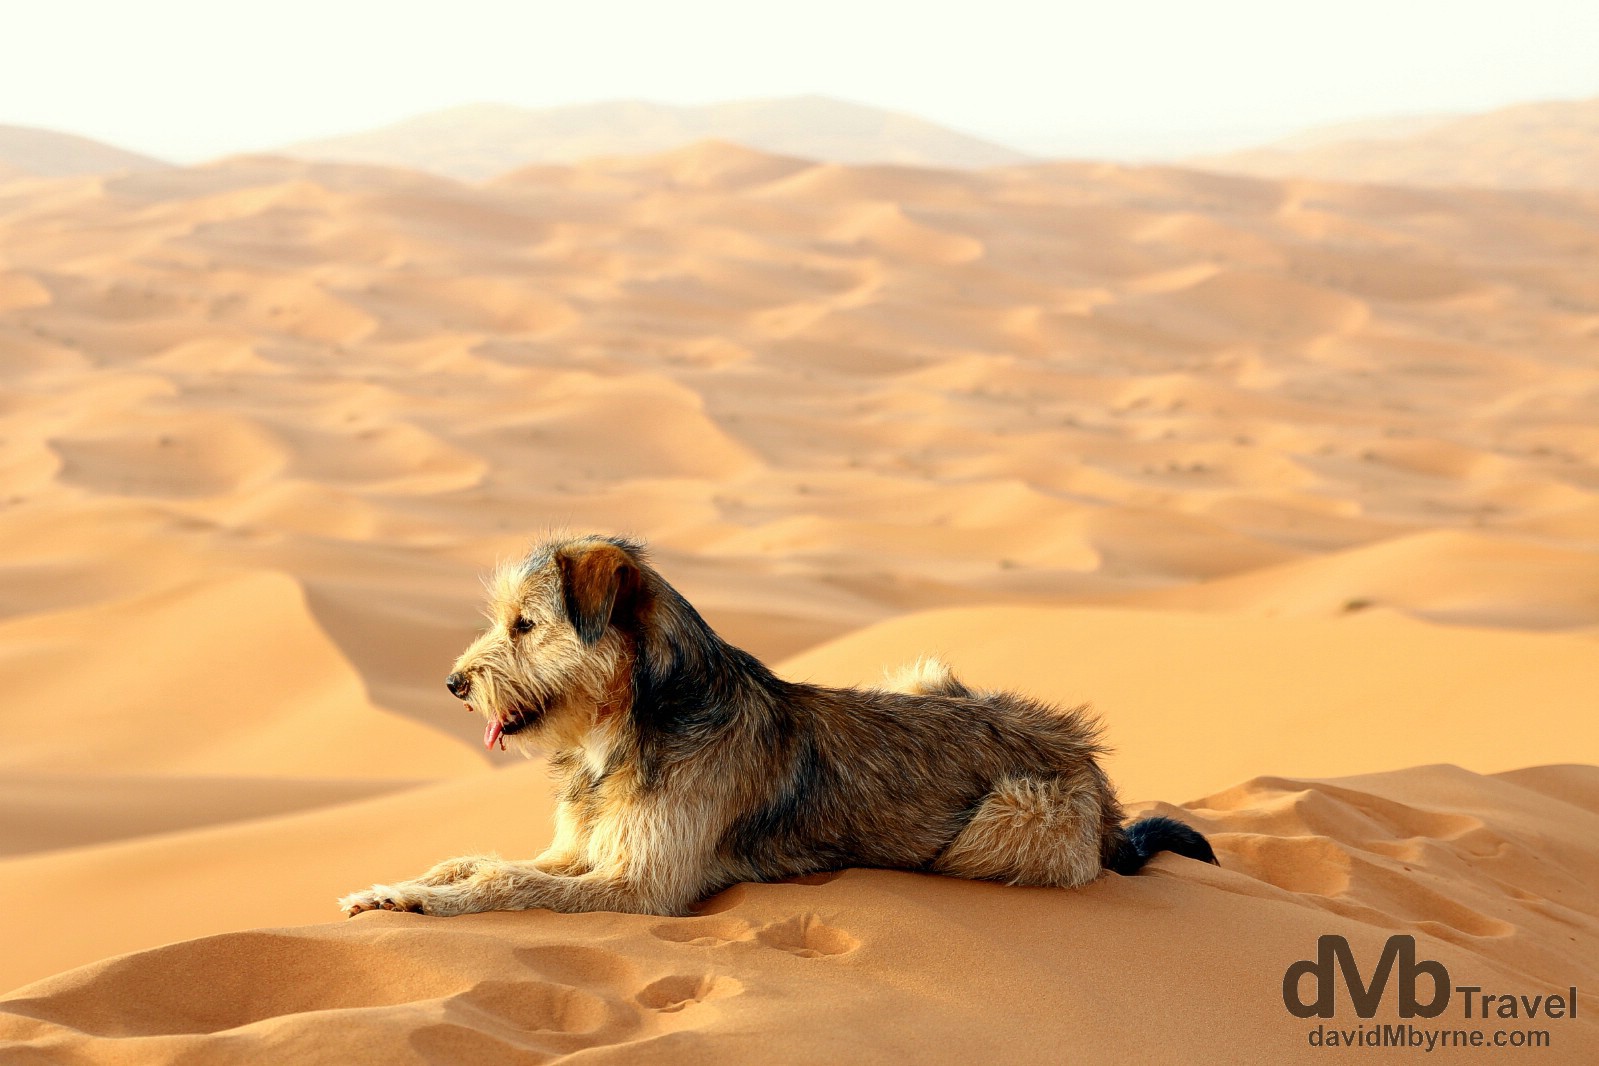 A shaggy dog resting on top of a massive sand dune in the desert of Erg Chebbi, Marzouga, Morocco. May 19th, 2014. 